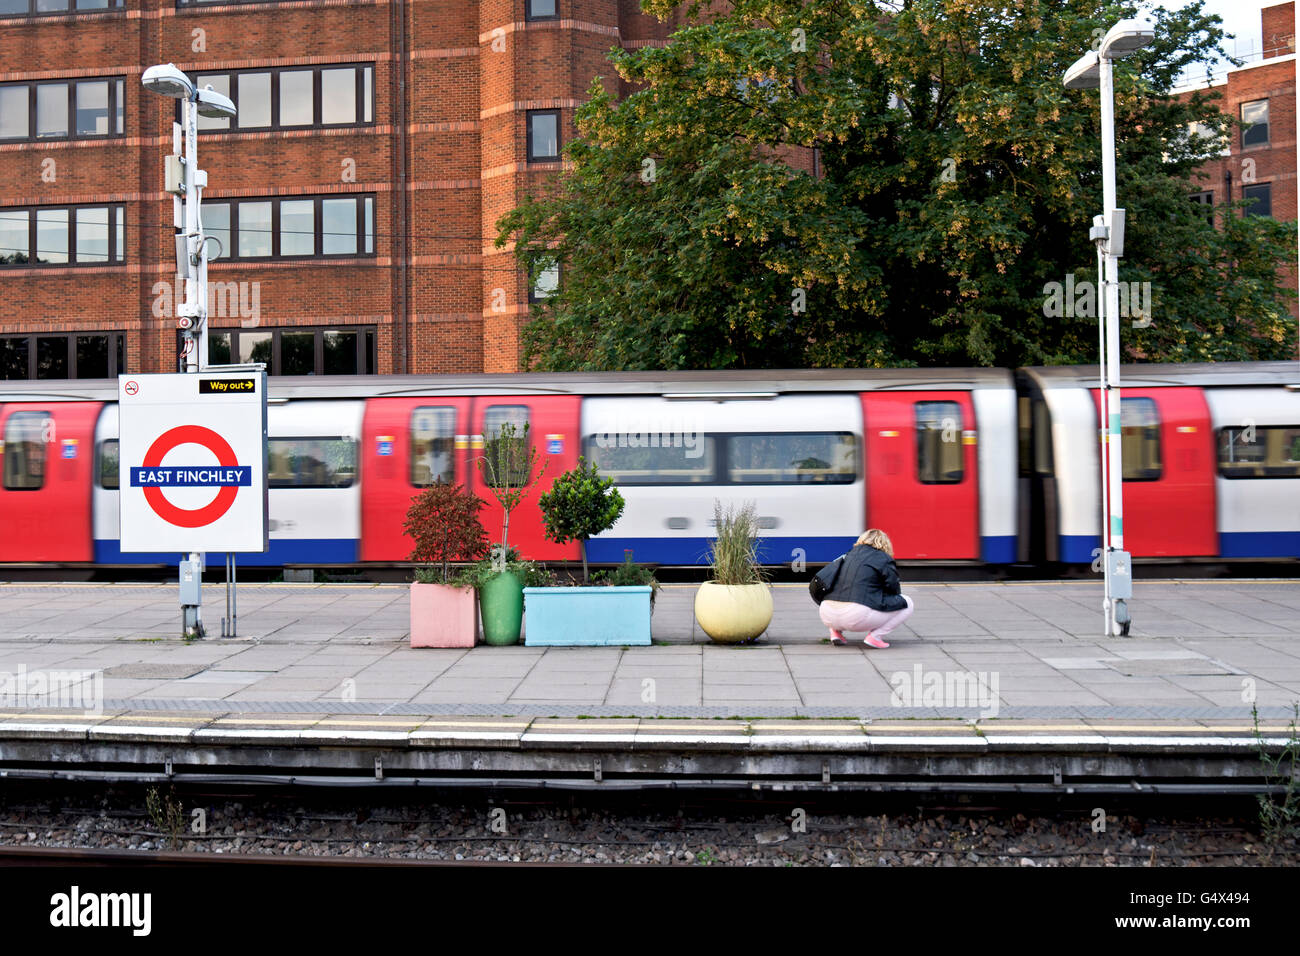 A woman squats by some pastel coloured plant pots on East Finchley Tube station platform, as a train passes by. Stock Photo